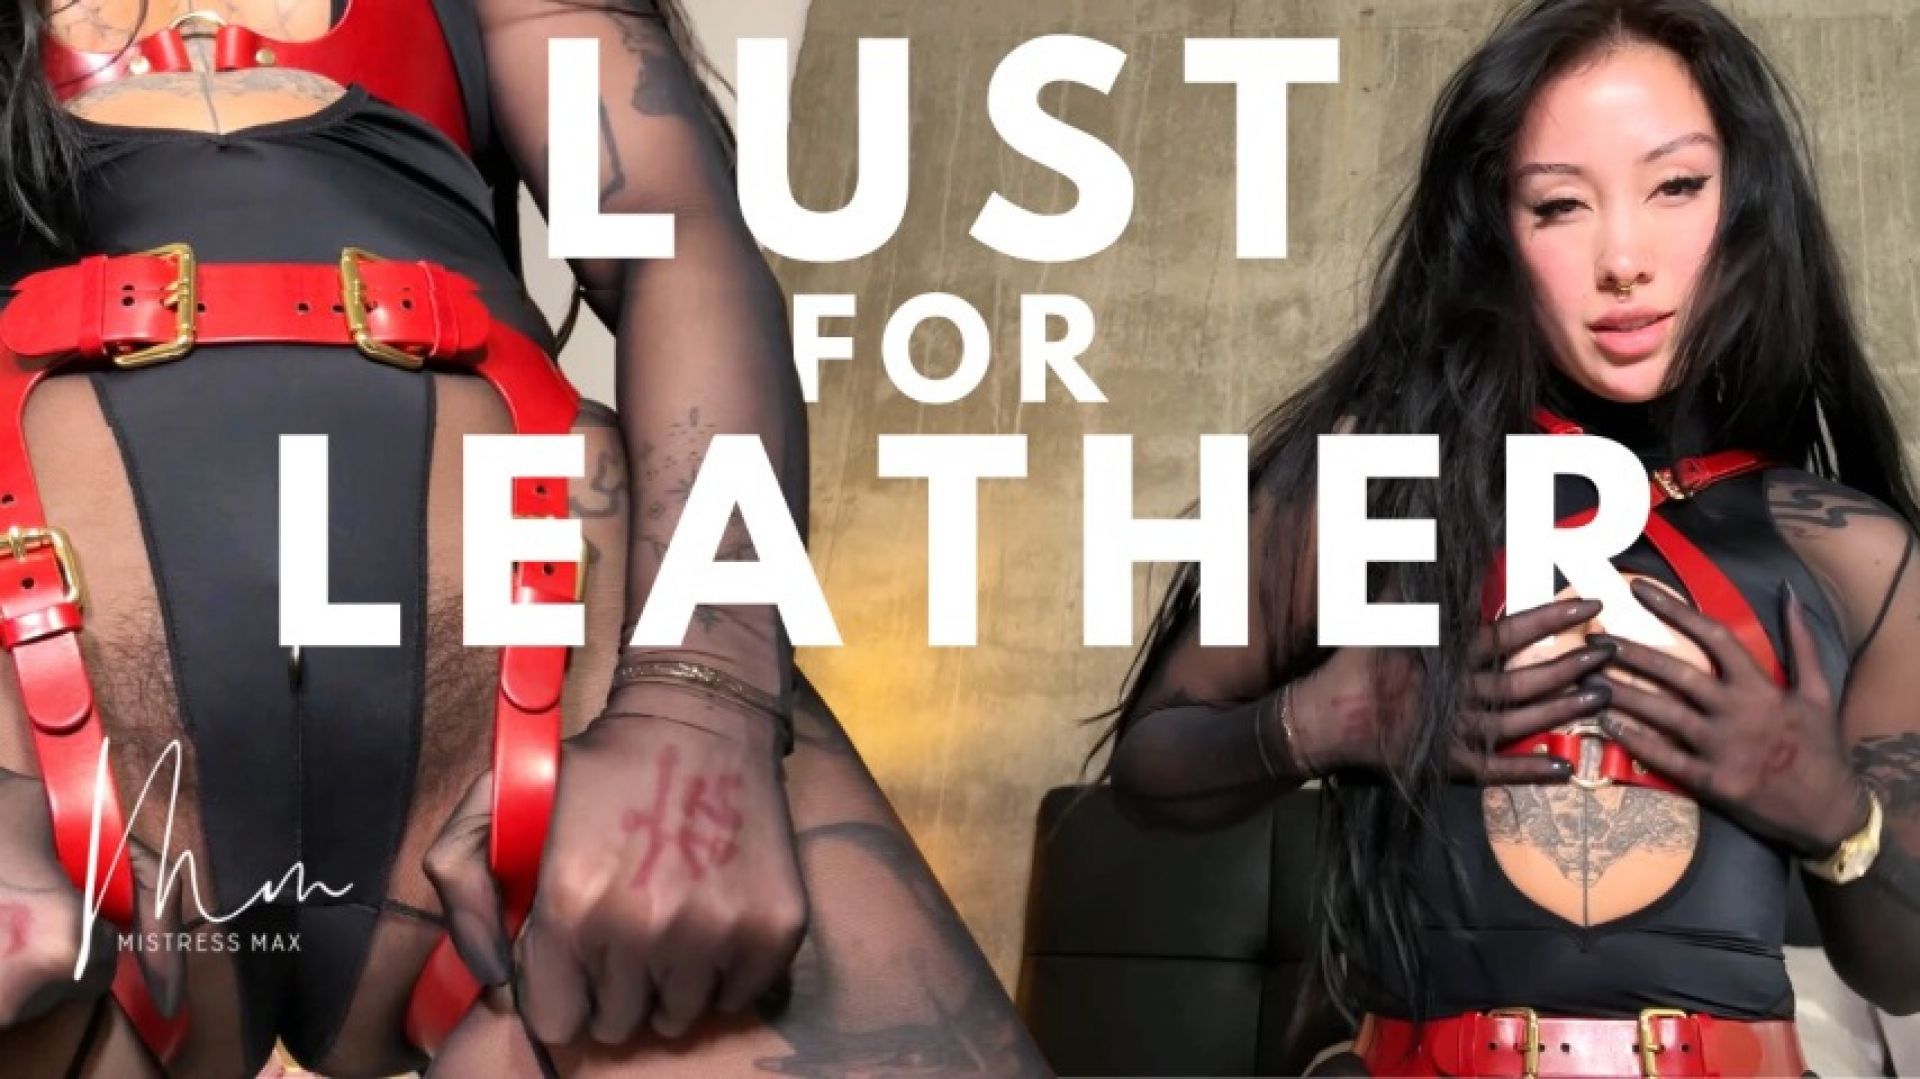 Lust for Leather